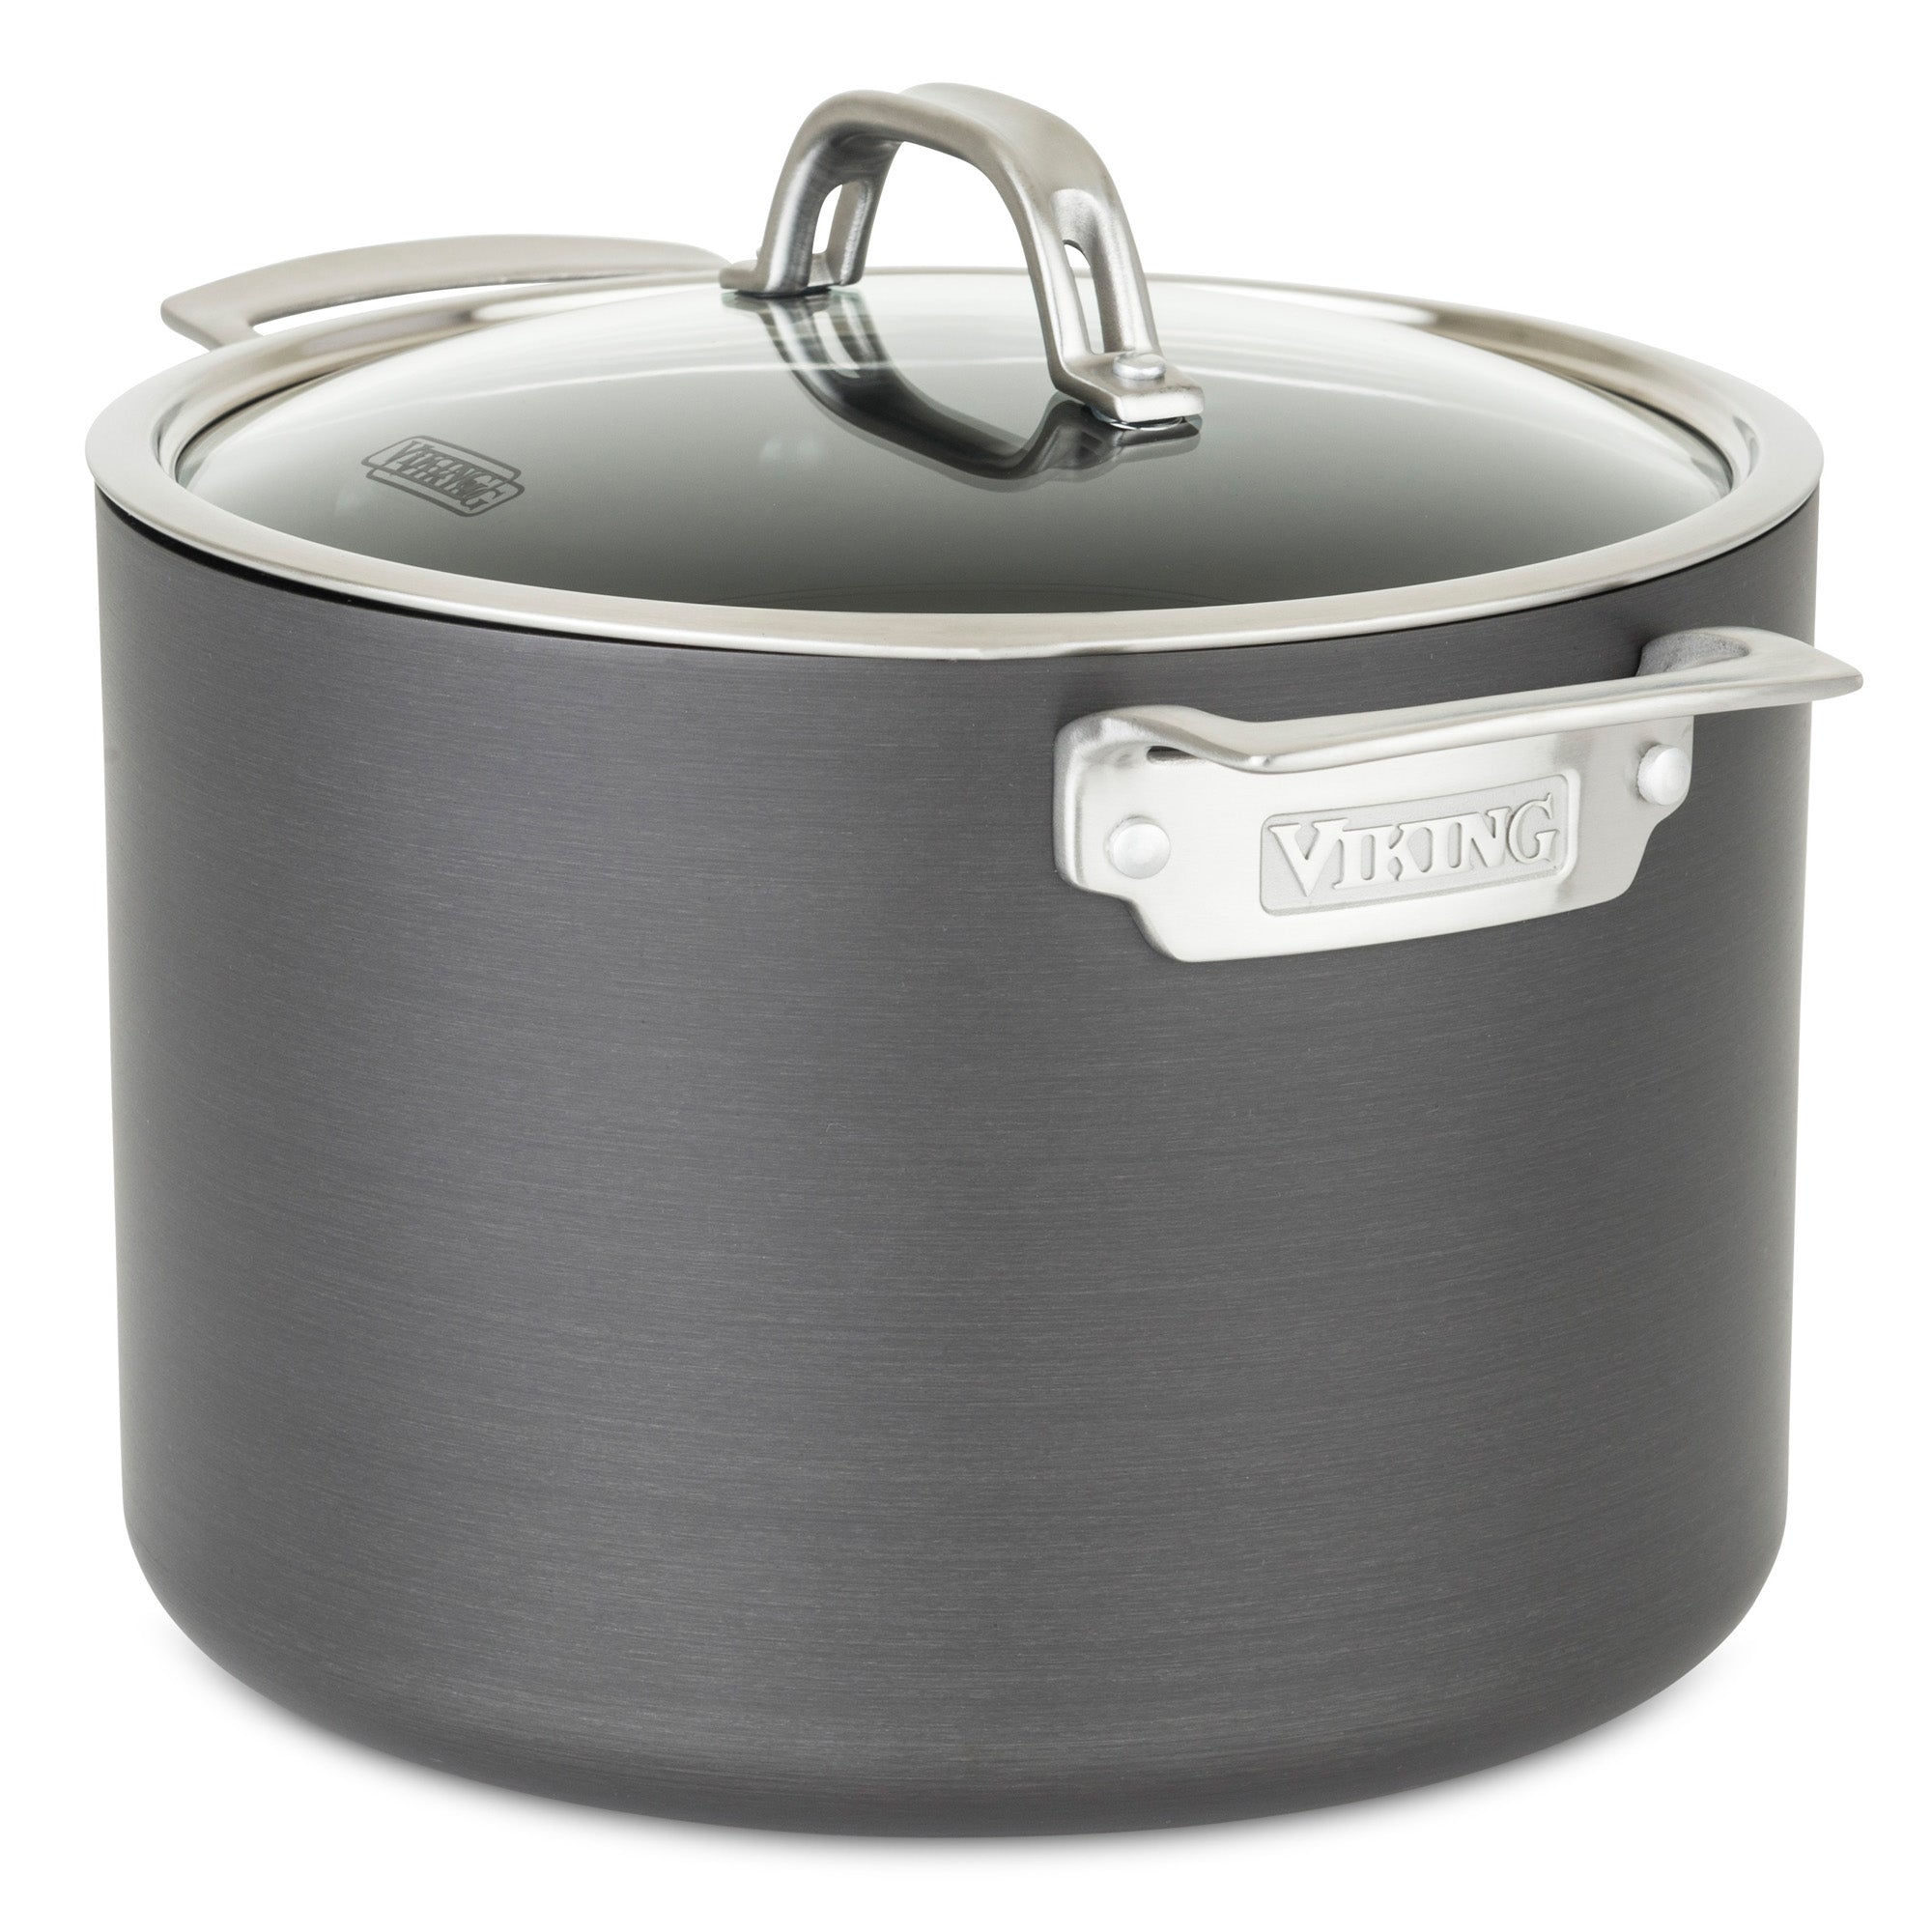 5 QT Non-stick Stockpot with Glass Lid 